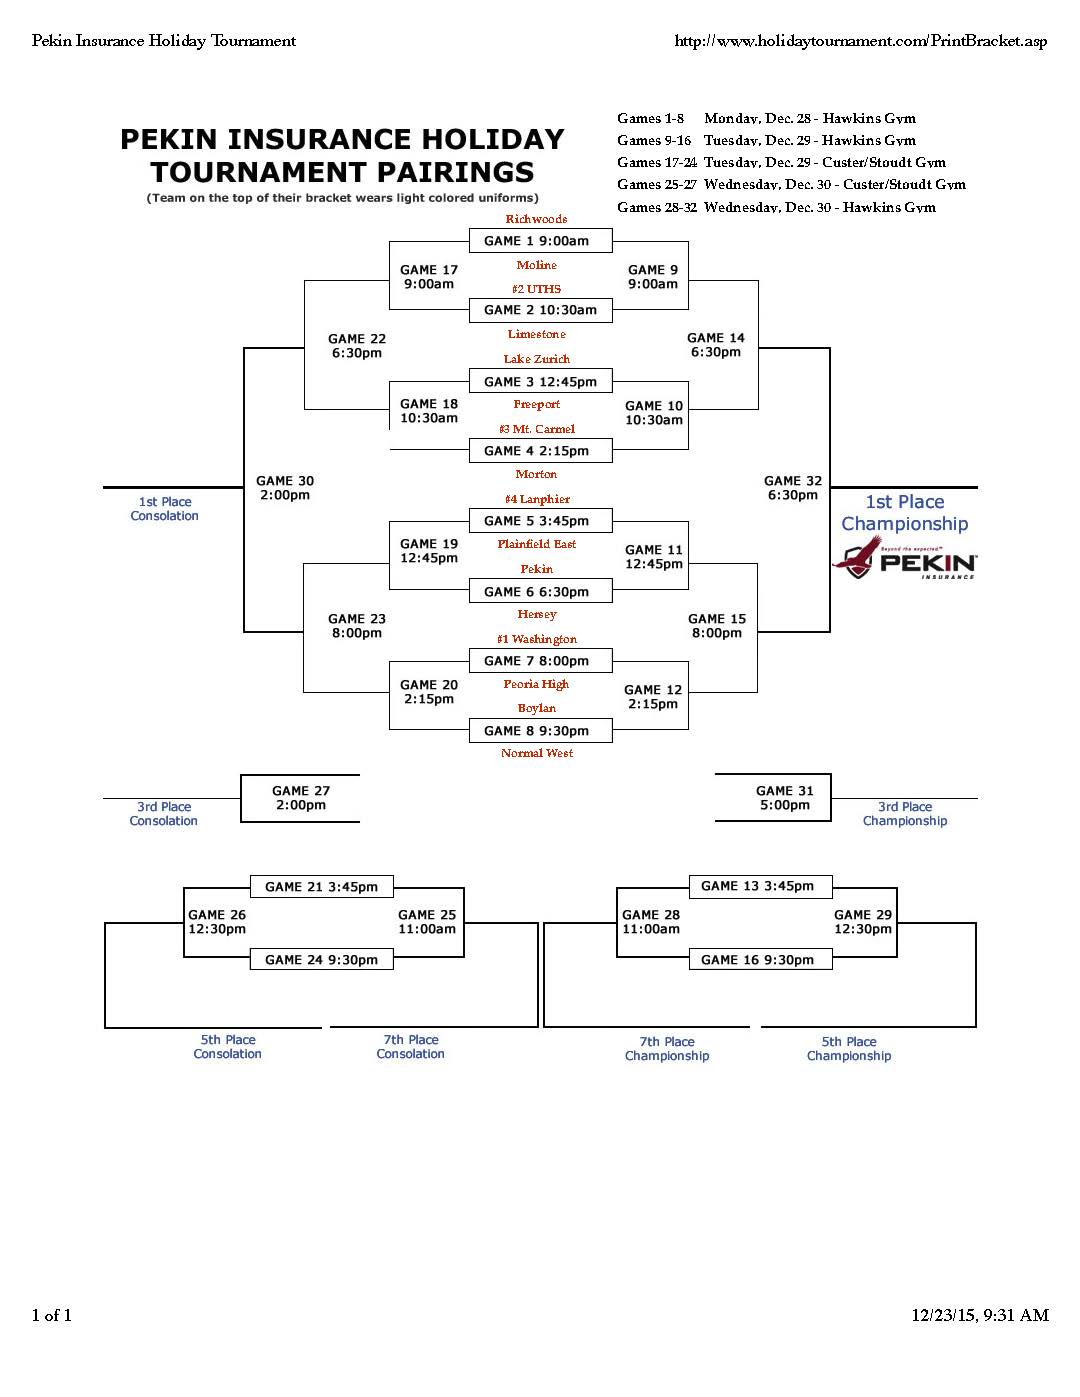 Holiday tournament action starts Monday on